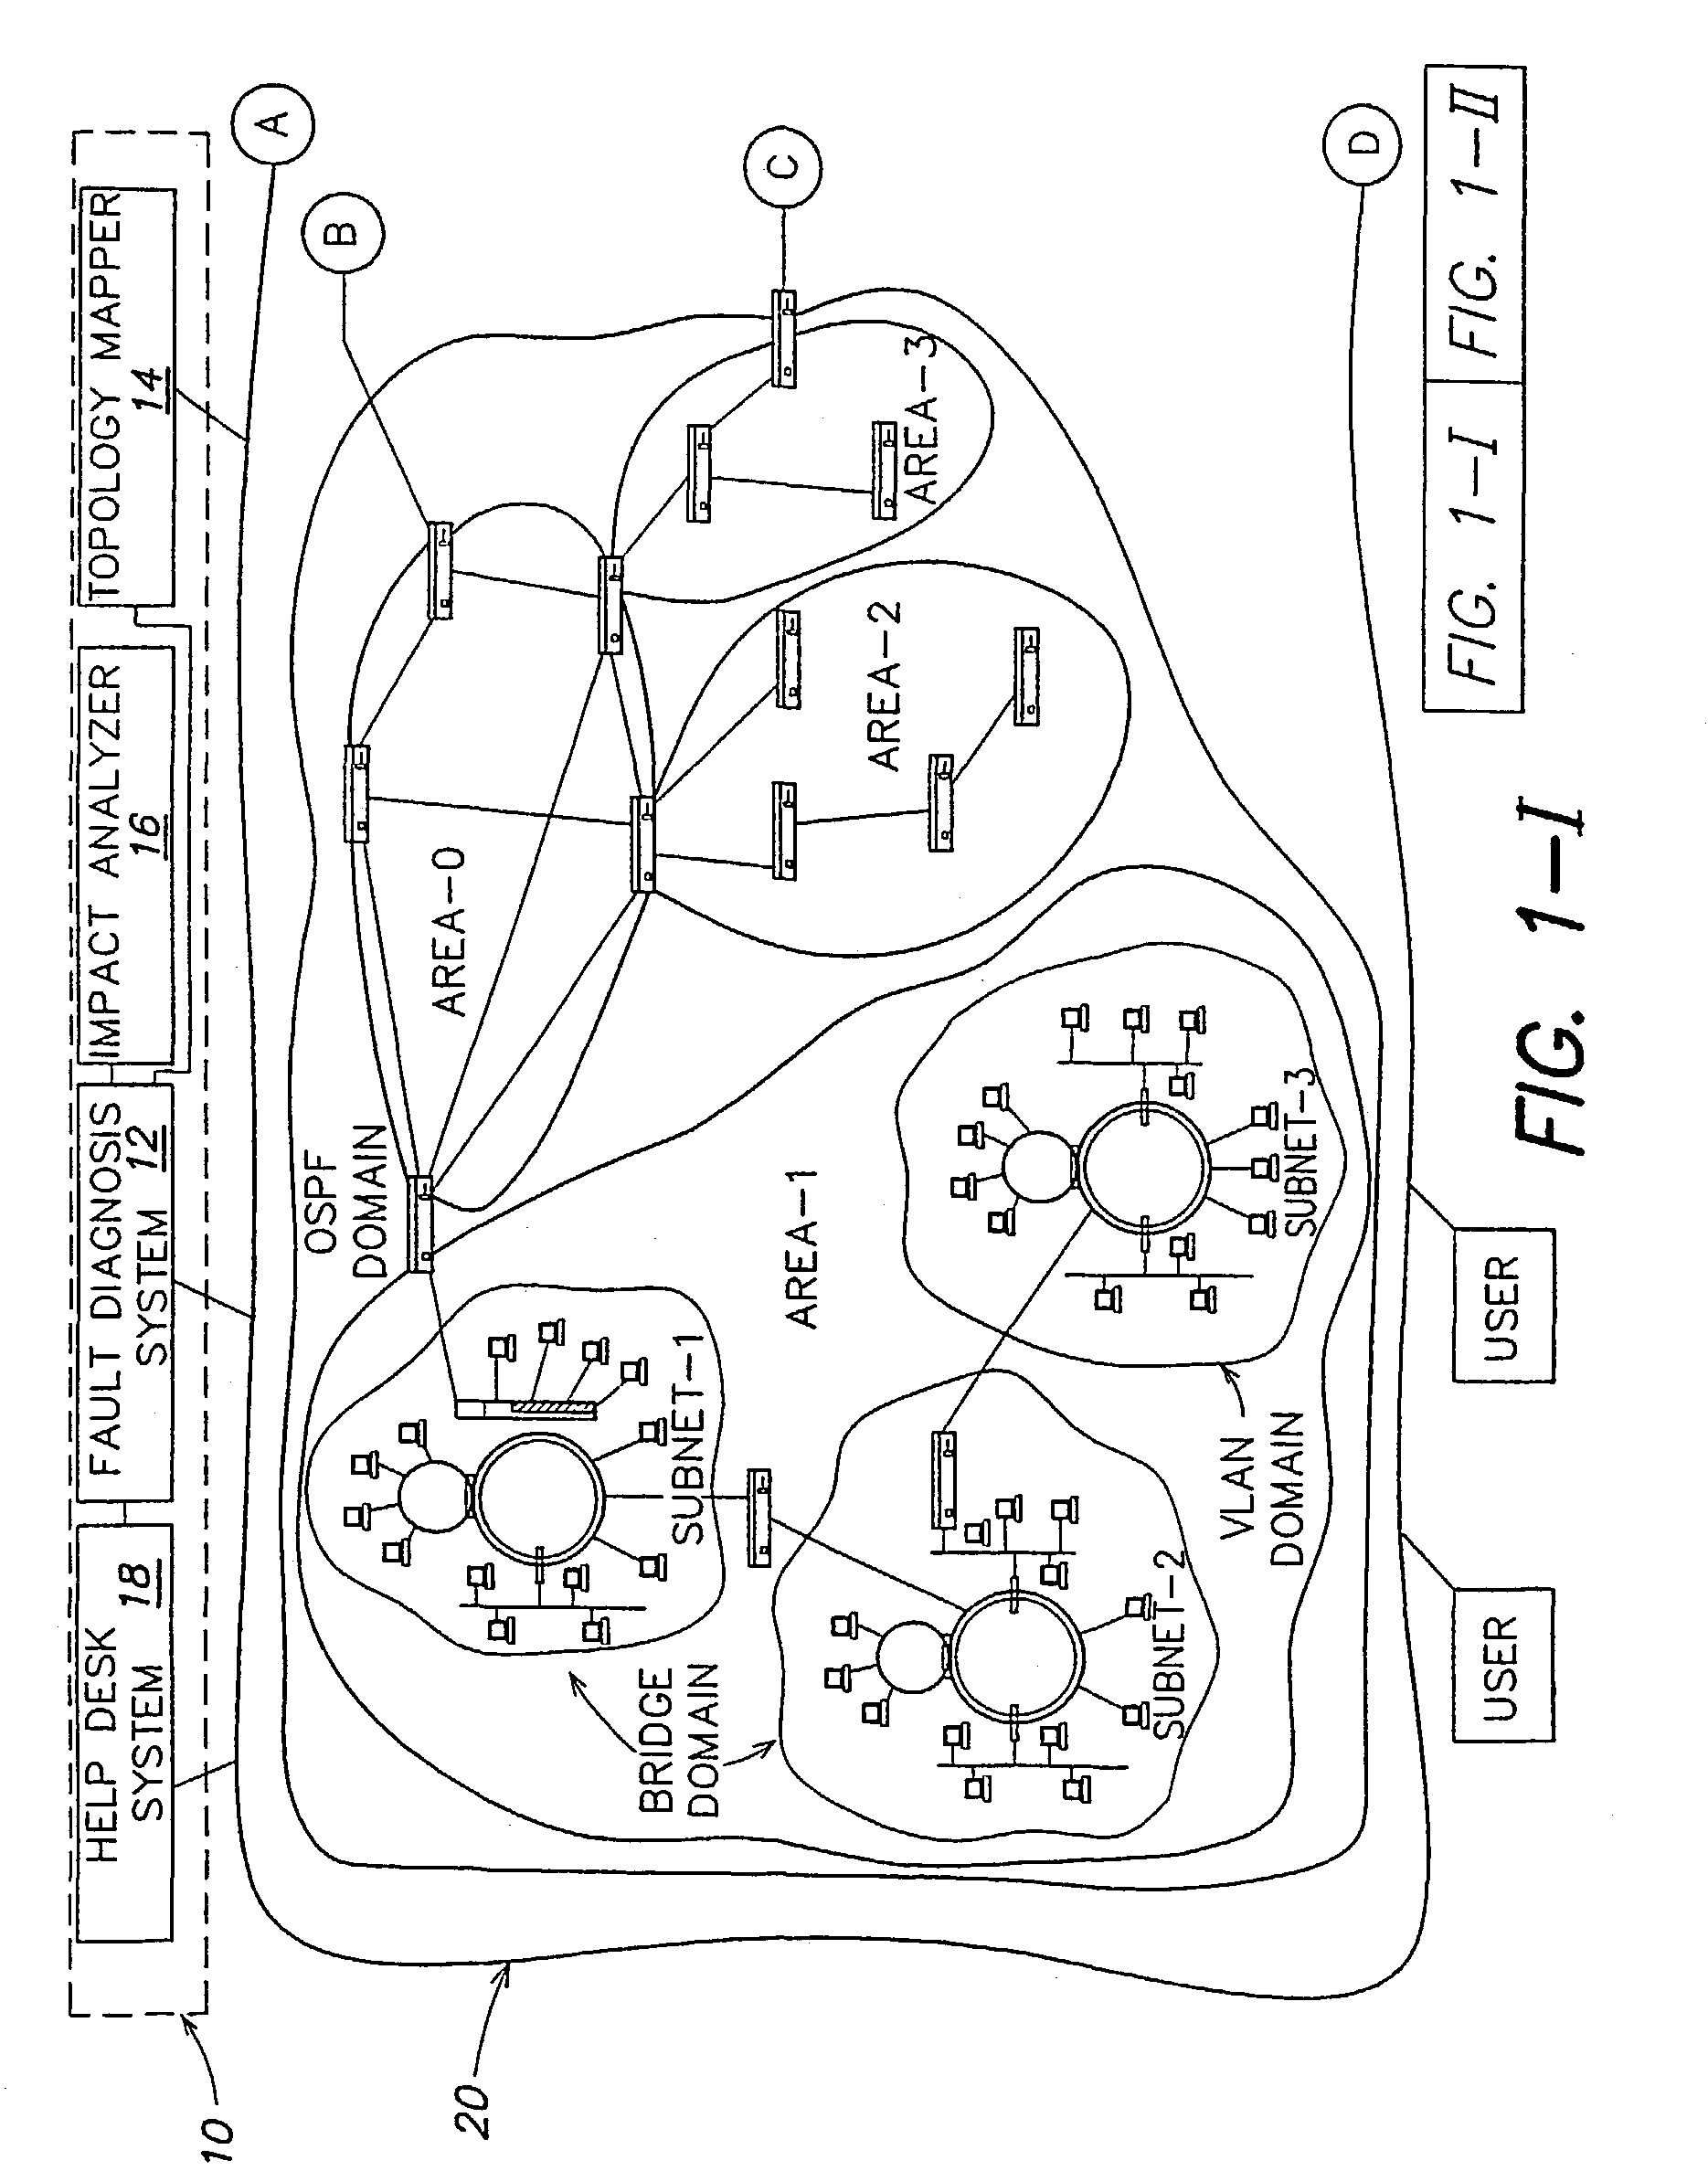 Systems and methods for diagnosing faults in computer networks